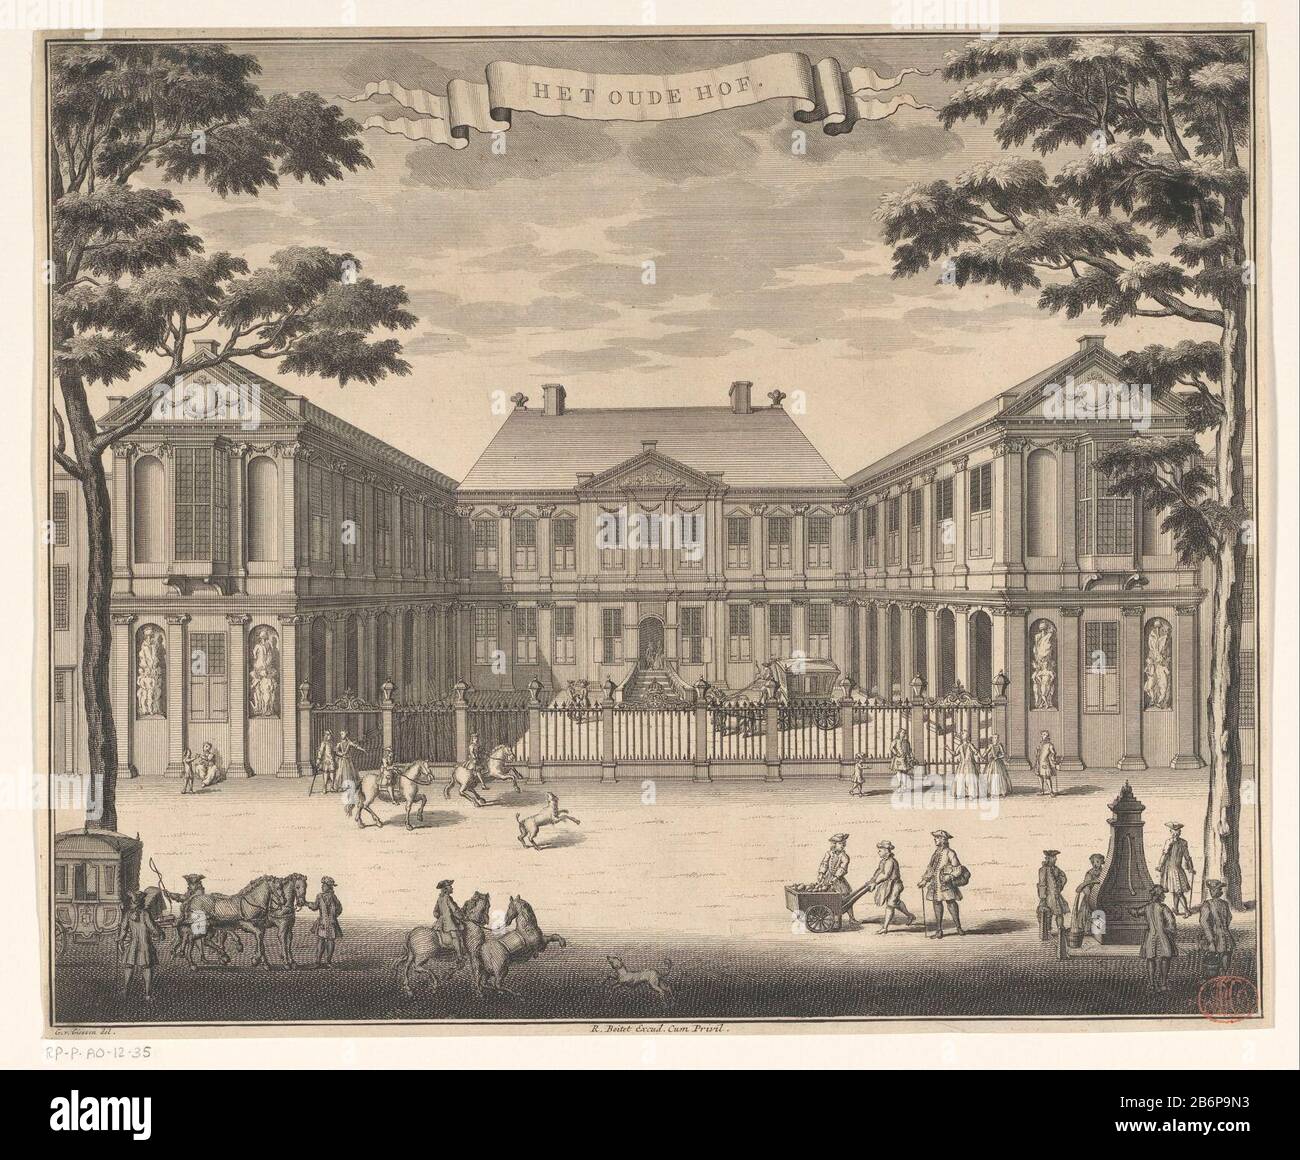 Gezicht op Paleis Noordeinde te Den Haag Het Oude Hof (titel op object) View of Noordeinde Palace, at the time of the Republic known as the Old Court in the Haag. Manufacturer : printmaker: anonymous to drawing: Gerrit van Giessen (listed building) publisher: Reinier Boitet (listed object ) Publisher: Adrianus Douci Pietersz Provider of privilege unknown (listed property) Place manufacture: from drawing: The Hague Publisher: Delft Publisher: Amsterdam Date: 1730 - 1736 Material: paper Technique: etching / engra (printing process) Dimensions: sheet: h 285 mm ( cut inside edge plate) b × 346 mm Stock Photo